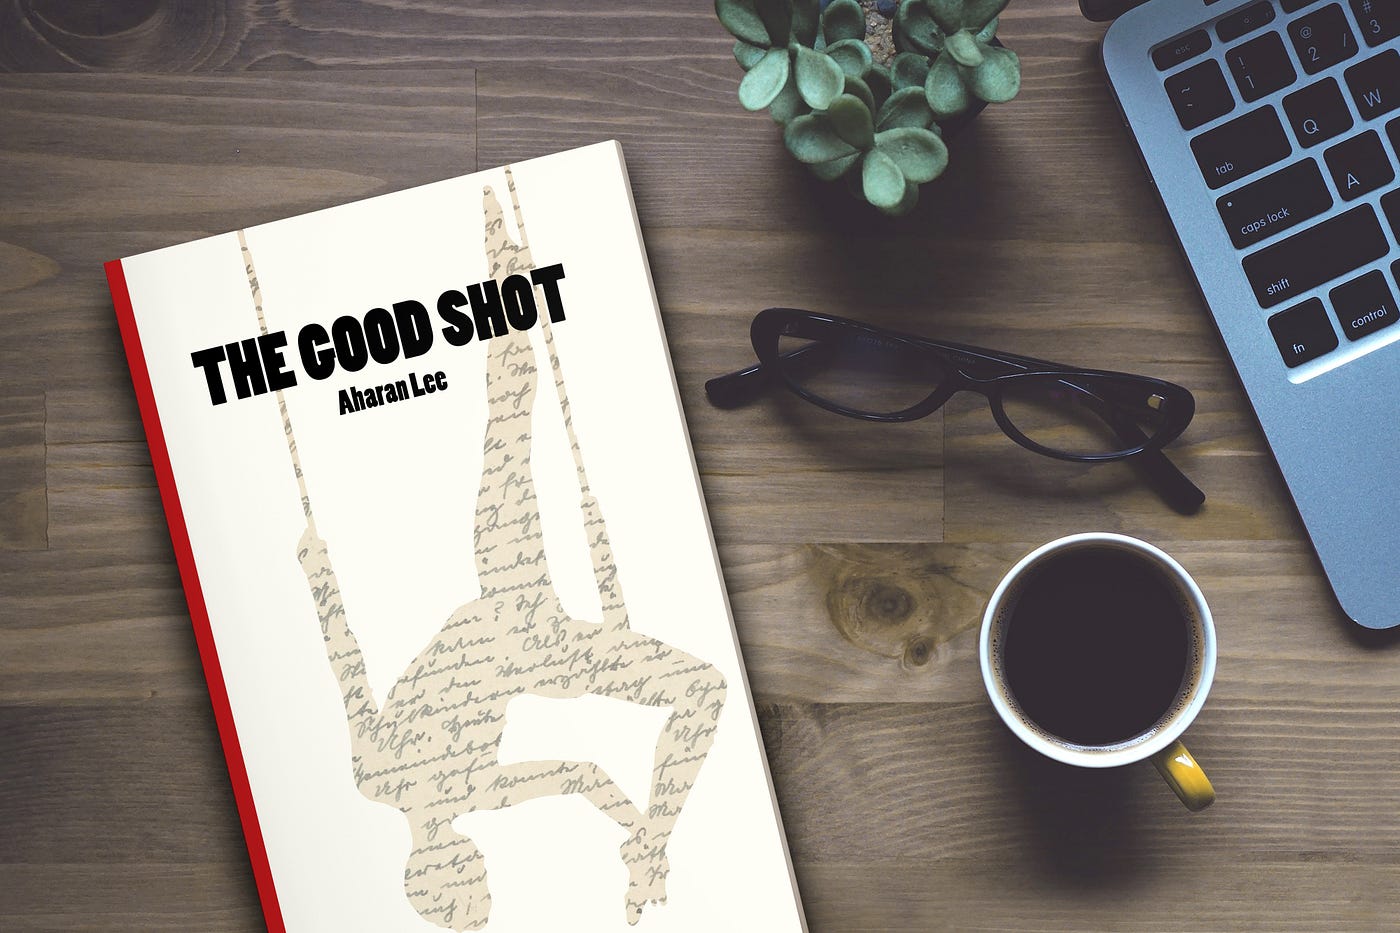 Interview with Martina Di Giammichele: Aharan Lee and The Good Shot (Black  Robot Publishing) | by Emanuela Manfredi | Medium